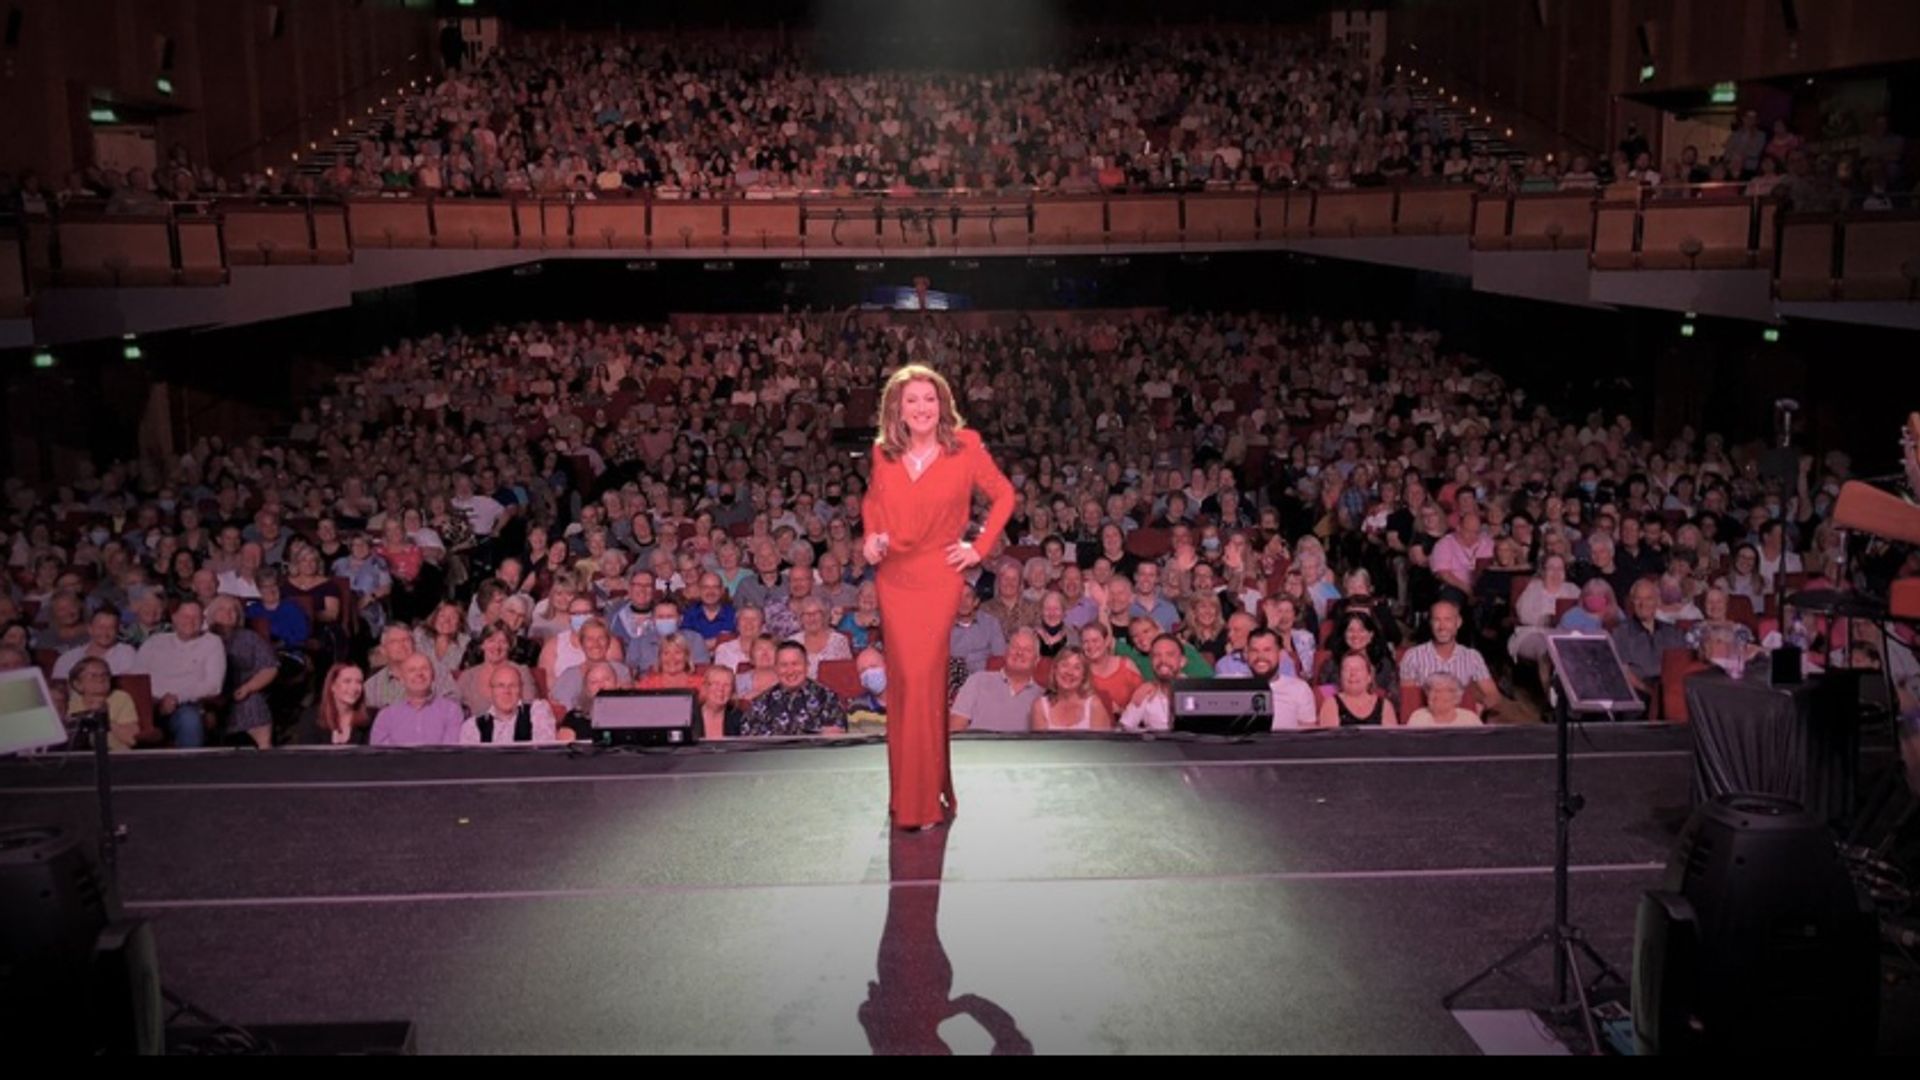 Jane McDonald in a red outfit in front of a crowd of people